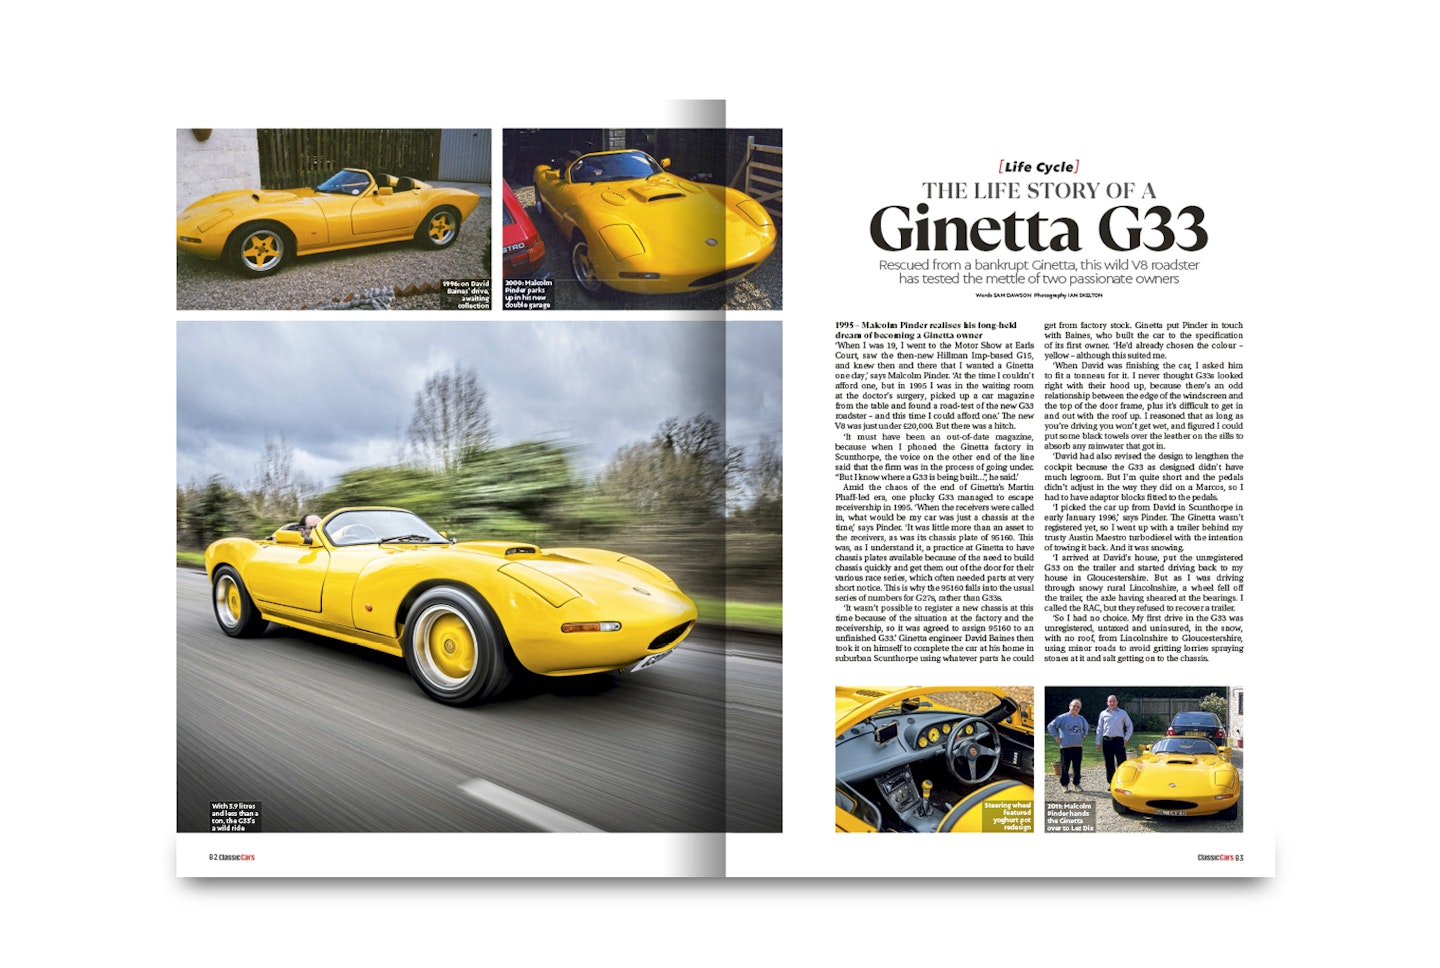 Life Cycle – The unlikely story of a tricky Ginetta G33 rescued from the jaws of bankruptcy